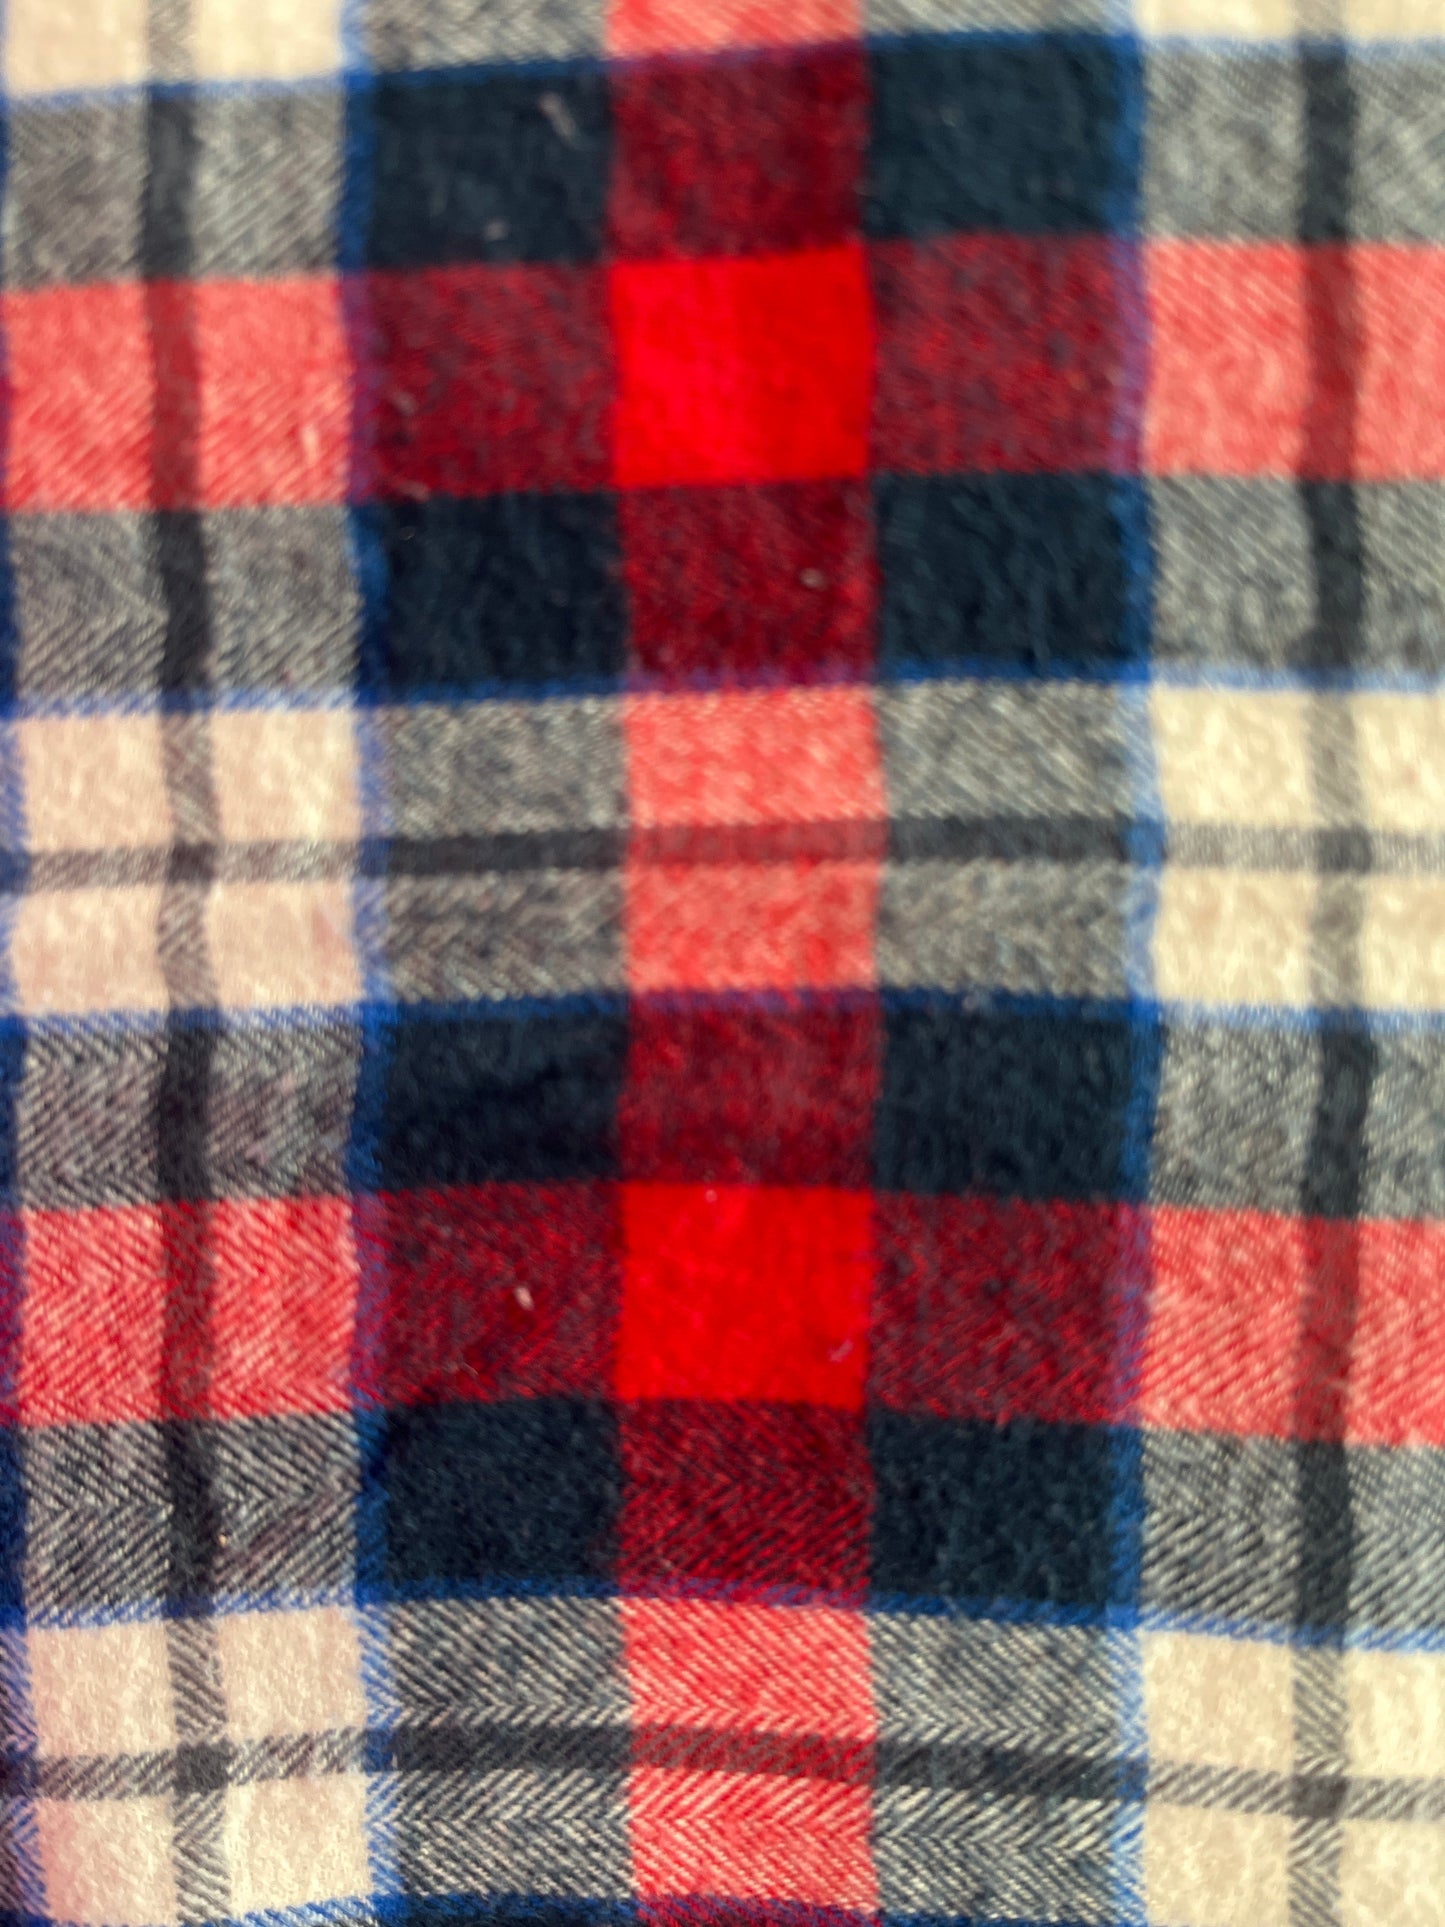 Blue, Red and Black Plaid